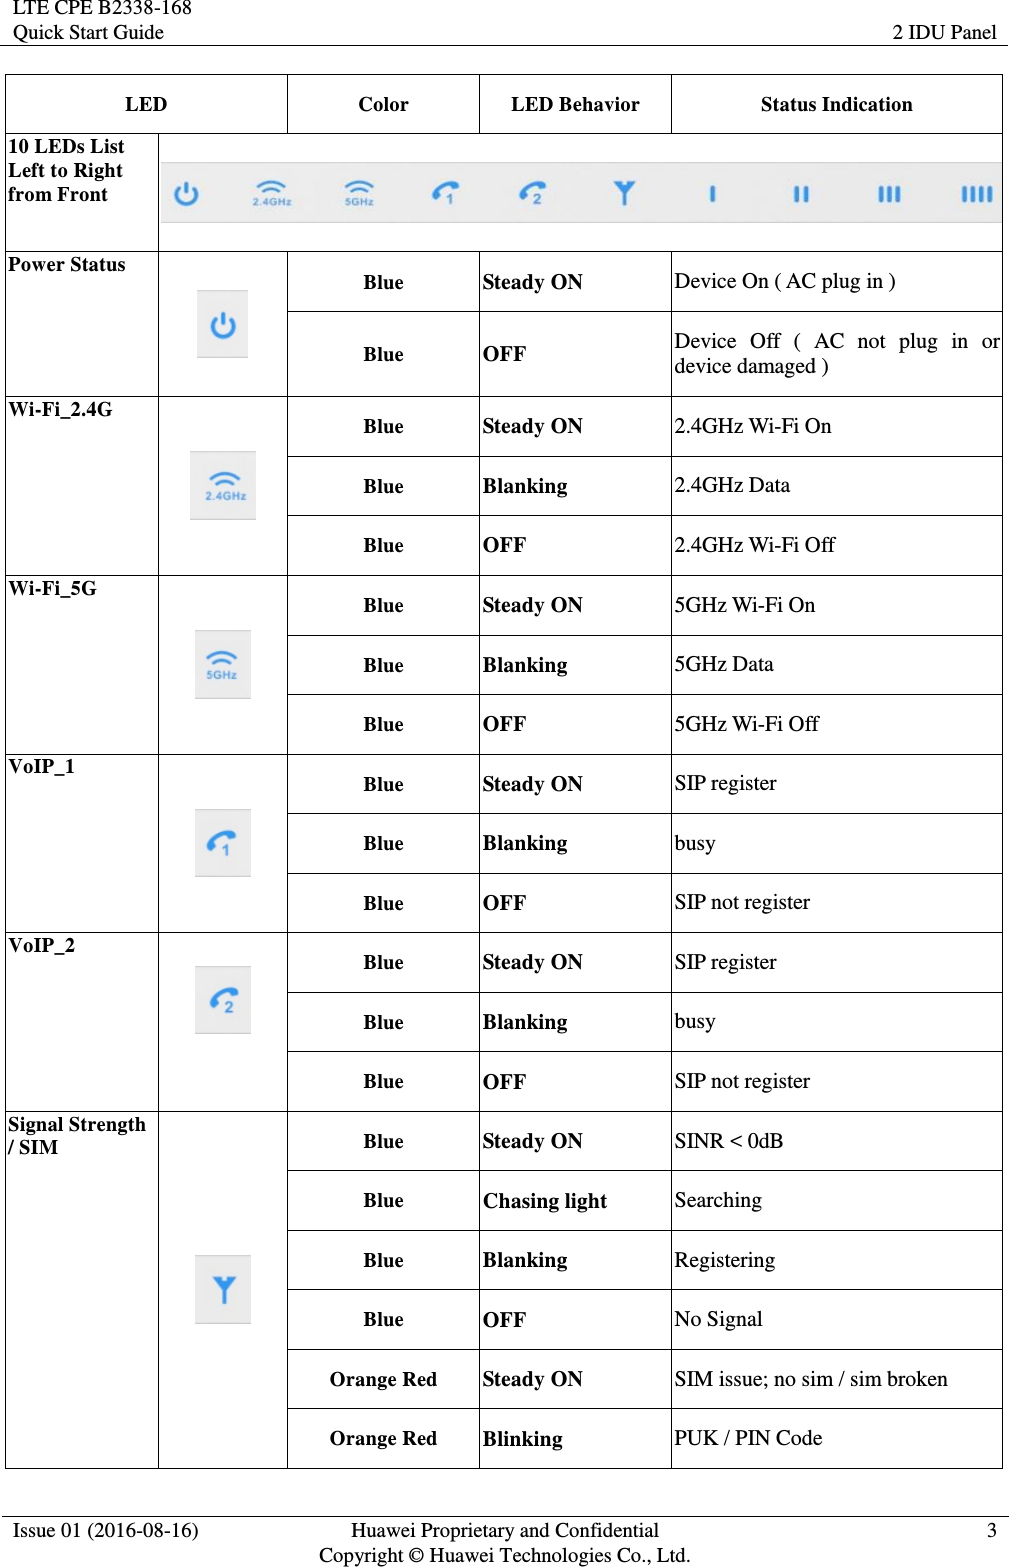 LTE CPE B2338-168 Quick Start Guide 2 IDU Panel  Issue 01 (2016-08-16) Huawei Proprietary and Confidential         Copyright © Huawei Technologies Co., Ltd. 3  LED   Color LED Behavior Status Indication 10 LEDs List   Left to Right from Front  Power Status     Blue Steady ON Device On ( AC plug in ) Blue OFF Device  Off  (  AC  not  plug  in  or device damaged ) Wi-Fi_2.4G   Blue Steady ON 2.4GHz Wi-Fi On Blue Blanking 2.4GHz Data   Blue OFF 2.4GHz Wi-Fi Off Wi-Fi_5G  Blue Steady ON 5GHz Wi-Fi On Blue Blanking 5GHz Data   Blue OFF 5GHz Wi-Fi Off VoIP_1  Blue Steady ON SIP register   Blue Blanking busy Blue OFF SIP not register VoIP_2  Blue Steady ON SIP register   Blue Blanking busy Blue OFF SIP not register Signal Strength / SIM    Blue Steady ON SINR &lt; 0dB Blue Chasing light Searching Blue Blanking Registering Blue OFF No Signal Orange Red Steady ON SIM issue; no sim / sim broken   Orange Red Blinking PUK / PIN Code 